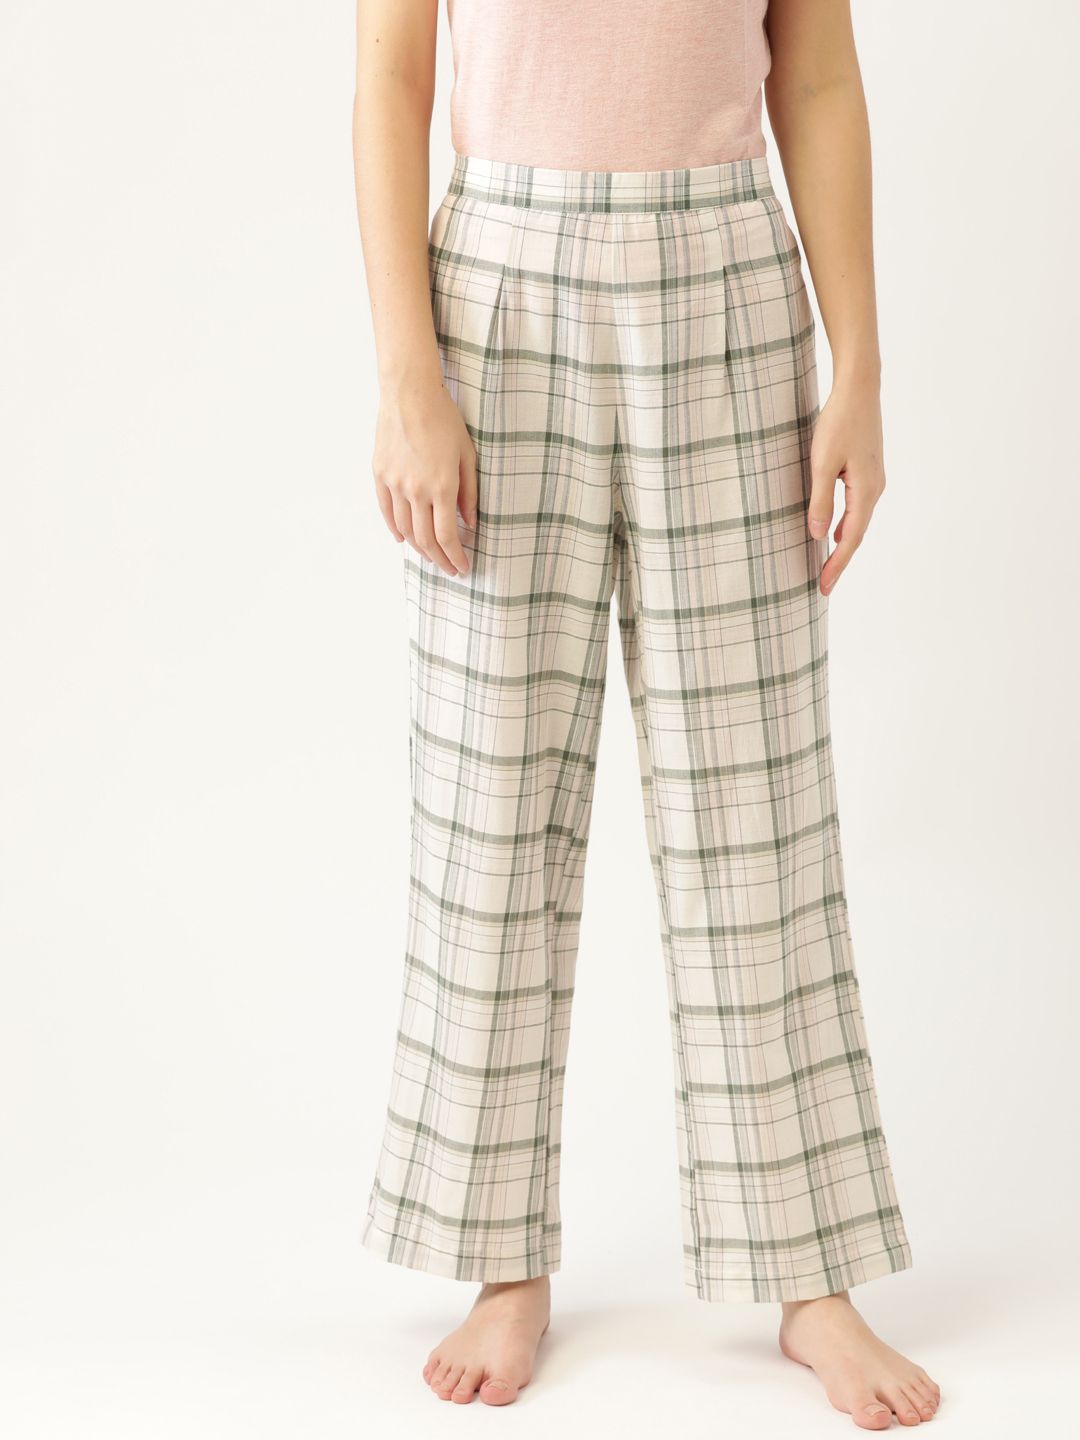 ETC Women Pure Cotton Maroon & Off-White Checked Lounge Pants Price in India